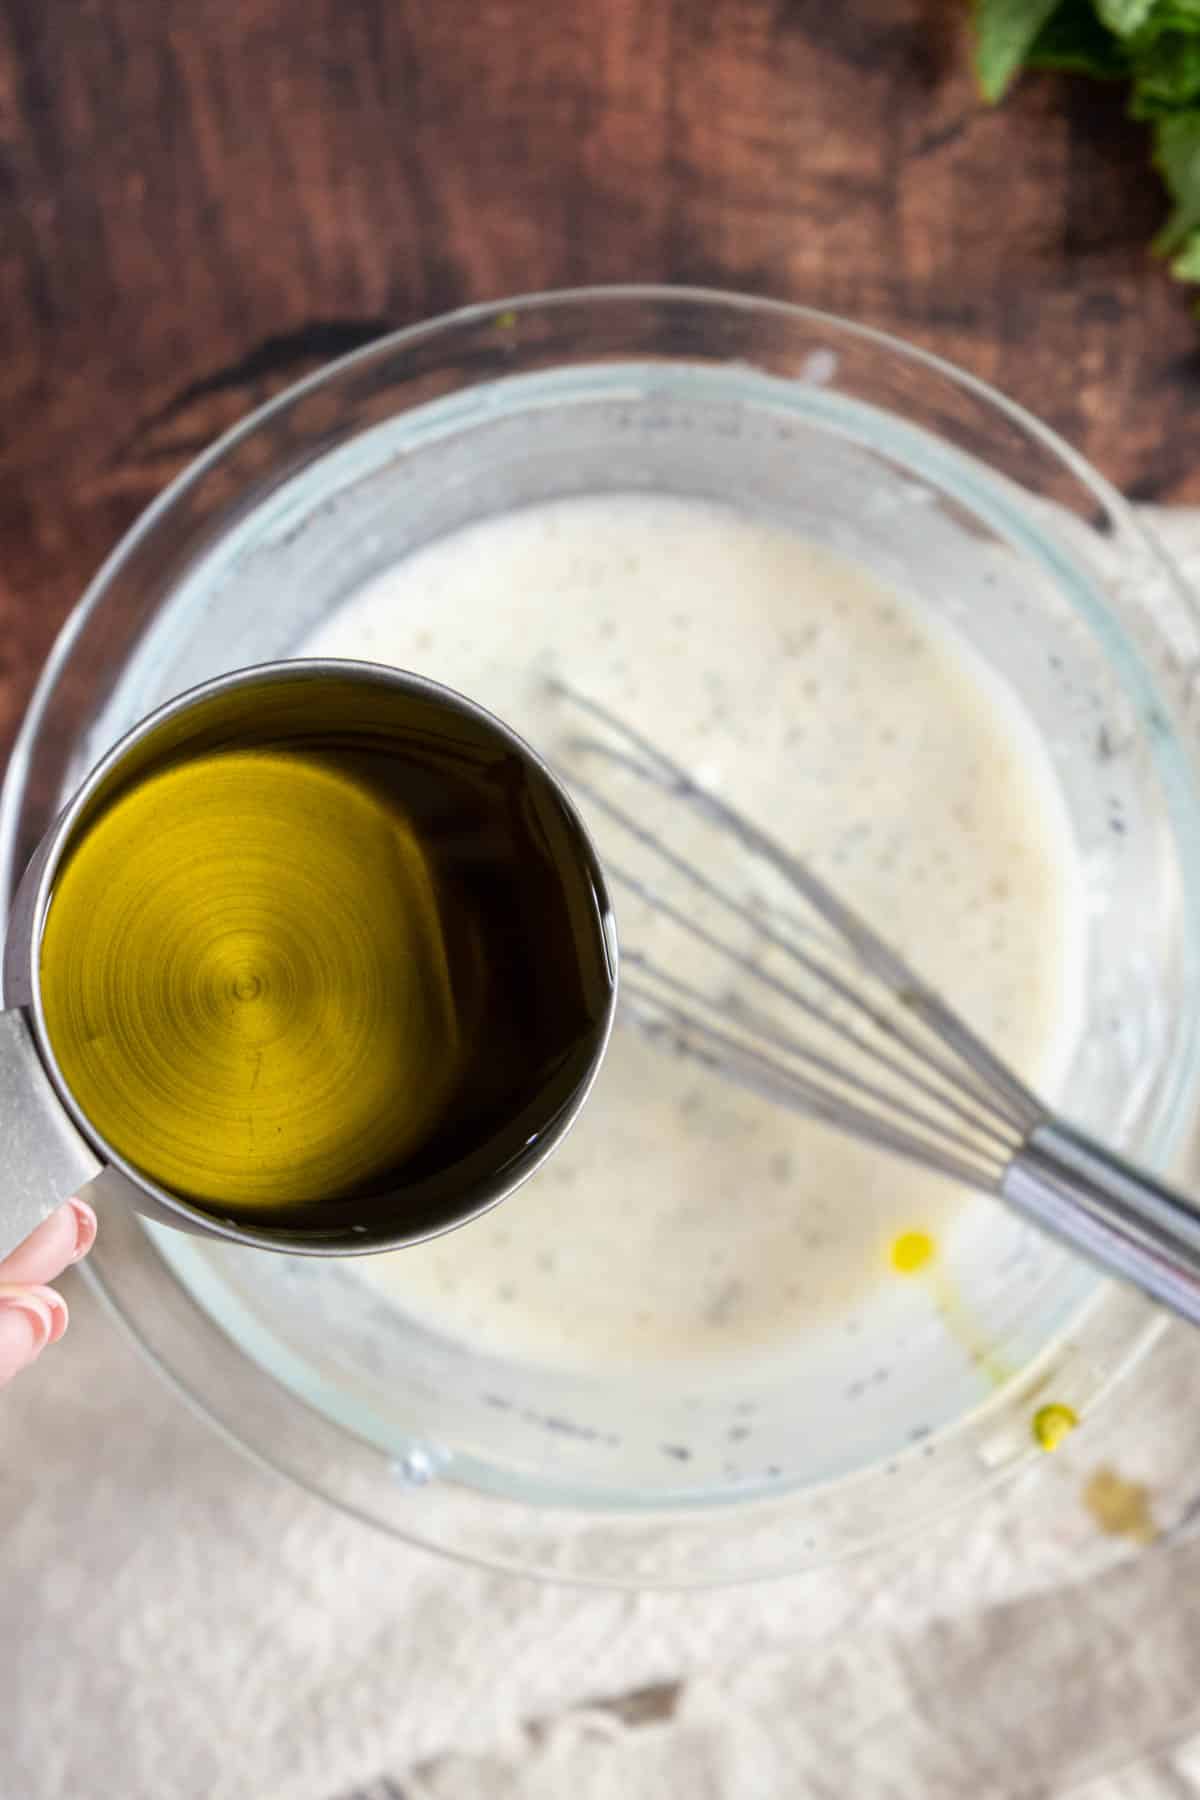 Drizzling olive oil into salad dressing.